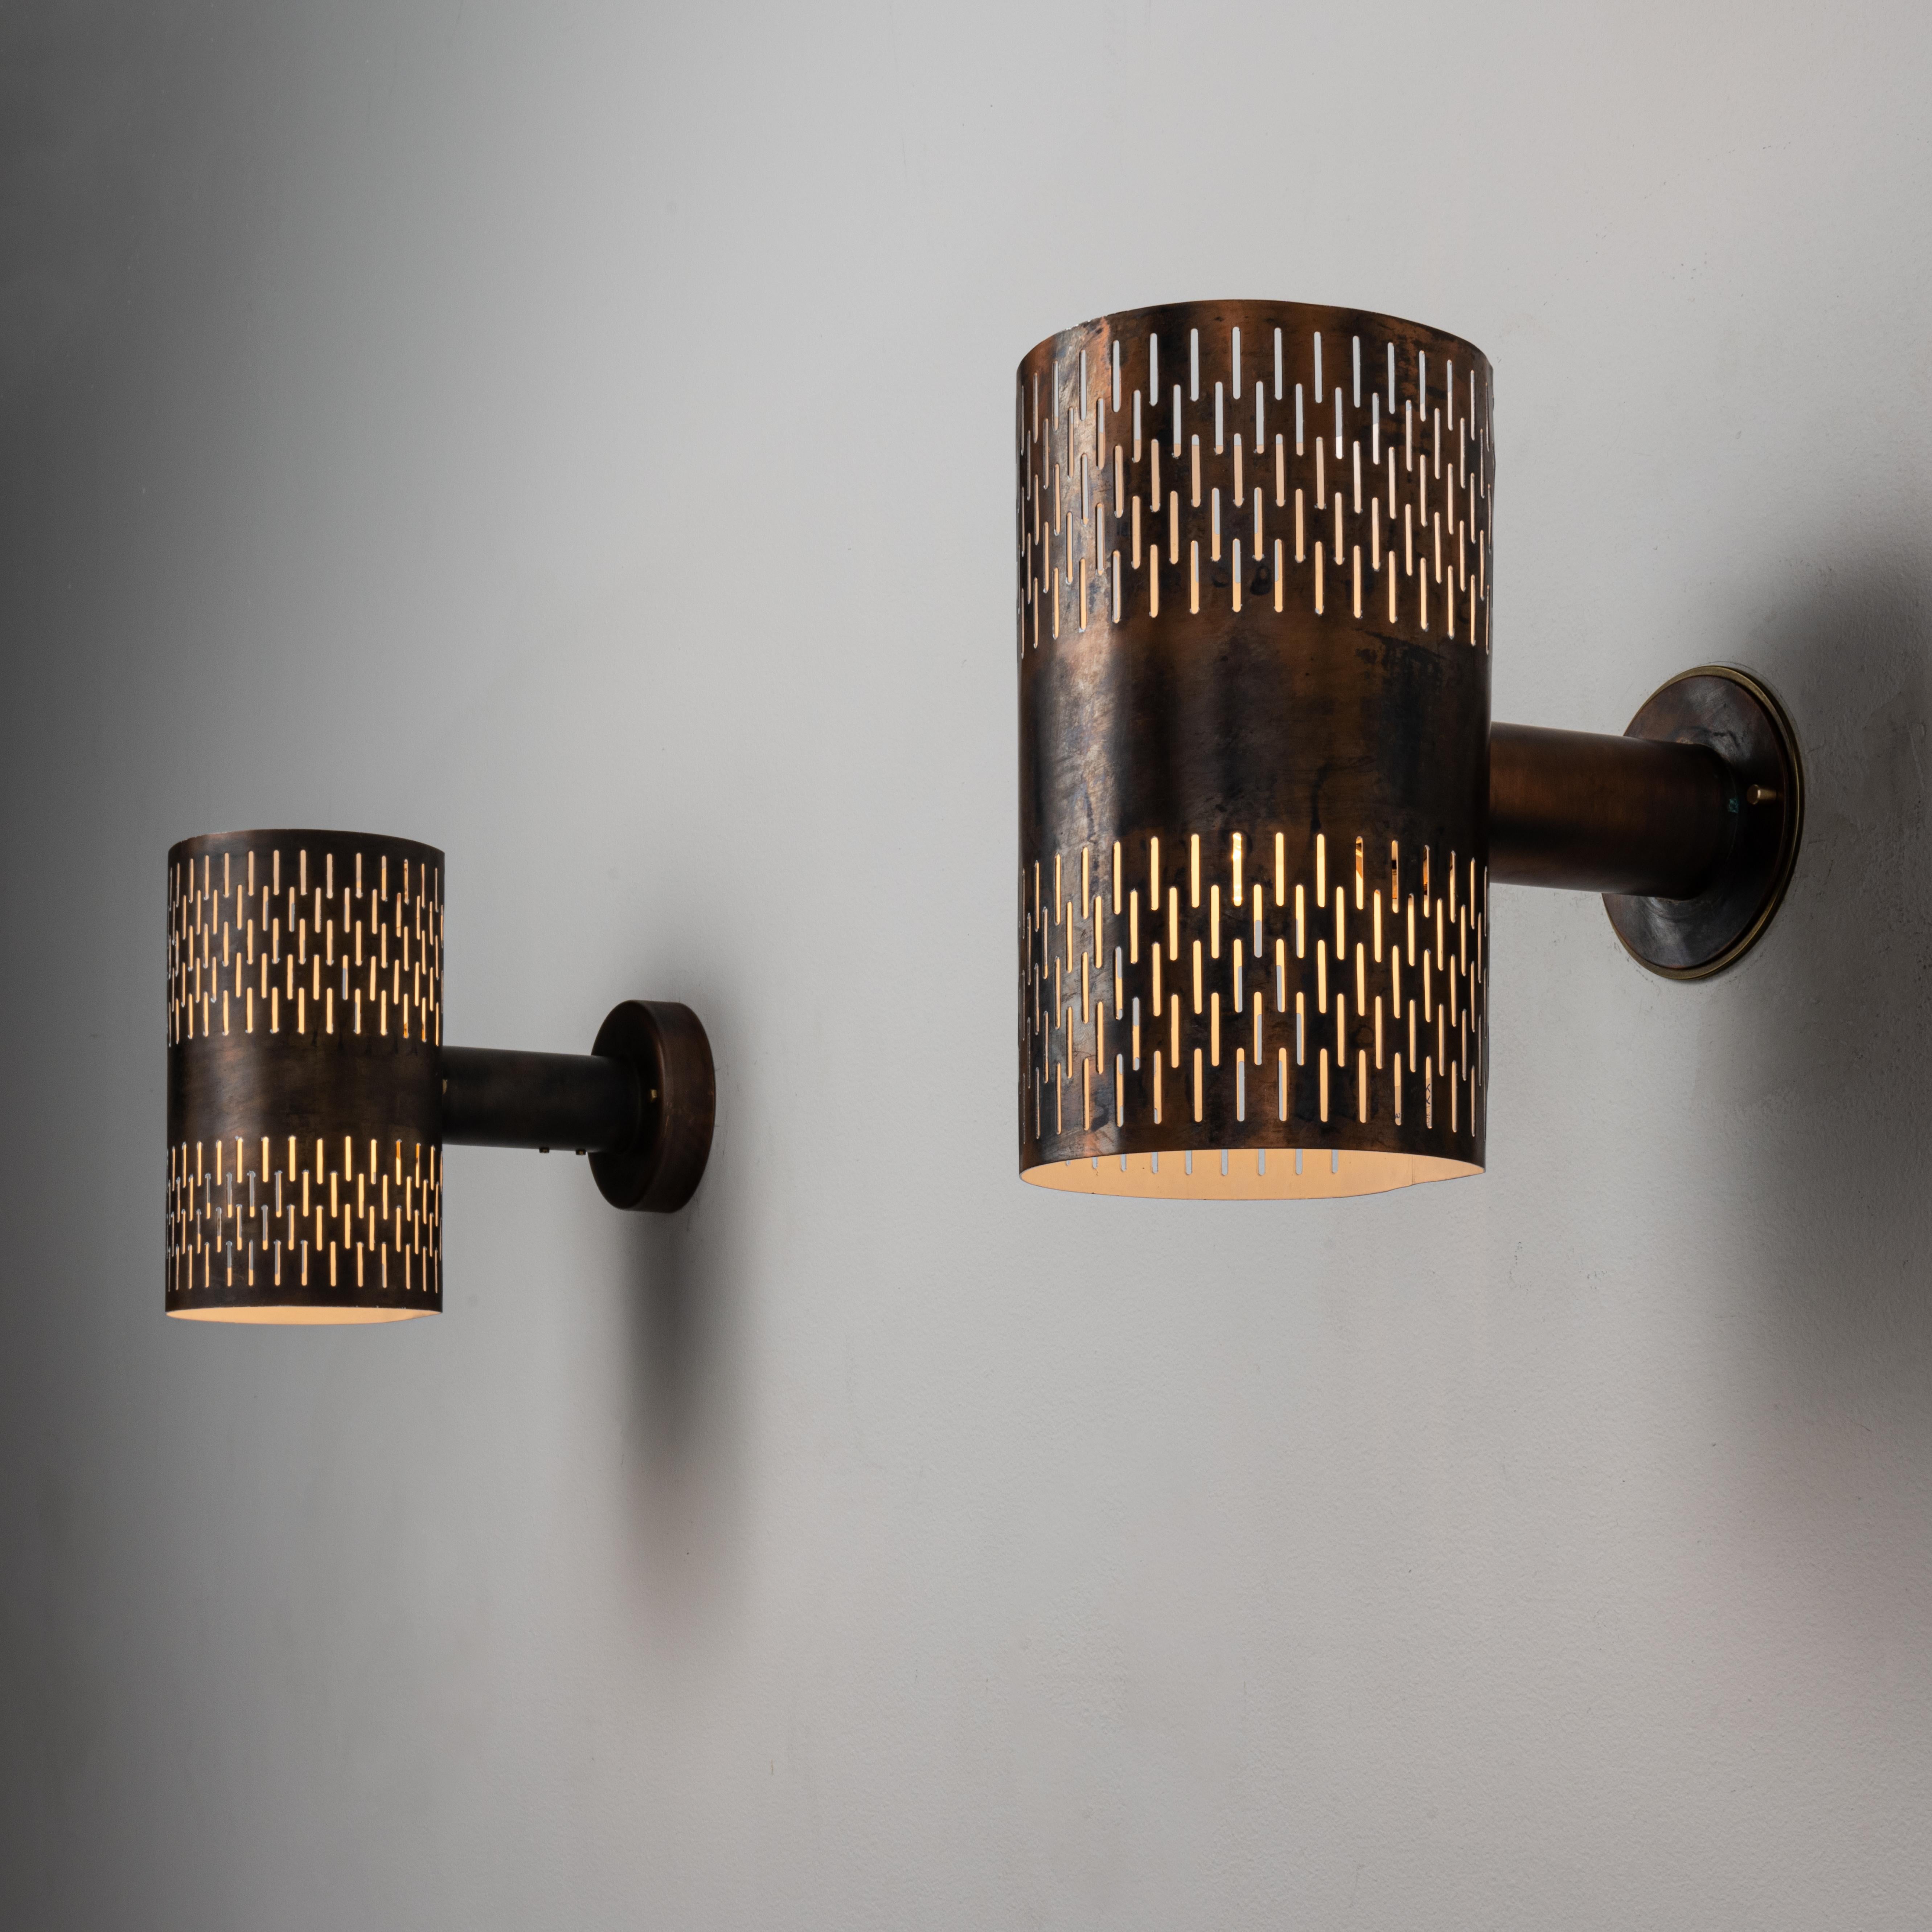 Pair of Sconces by Hans Bergstrom for Ateljé Lyktan. Designed and manufactured in Sweden, circa 1960's. Copper, Rewired for U.S. standards. We recommend one E27 100w maximum bulb per fixture. Bulbs not included.